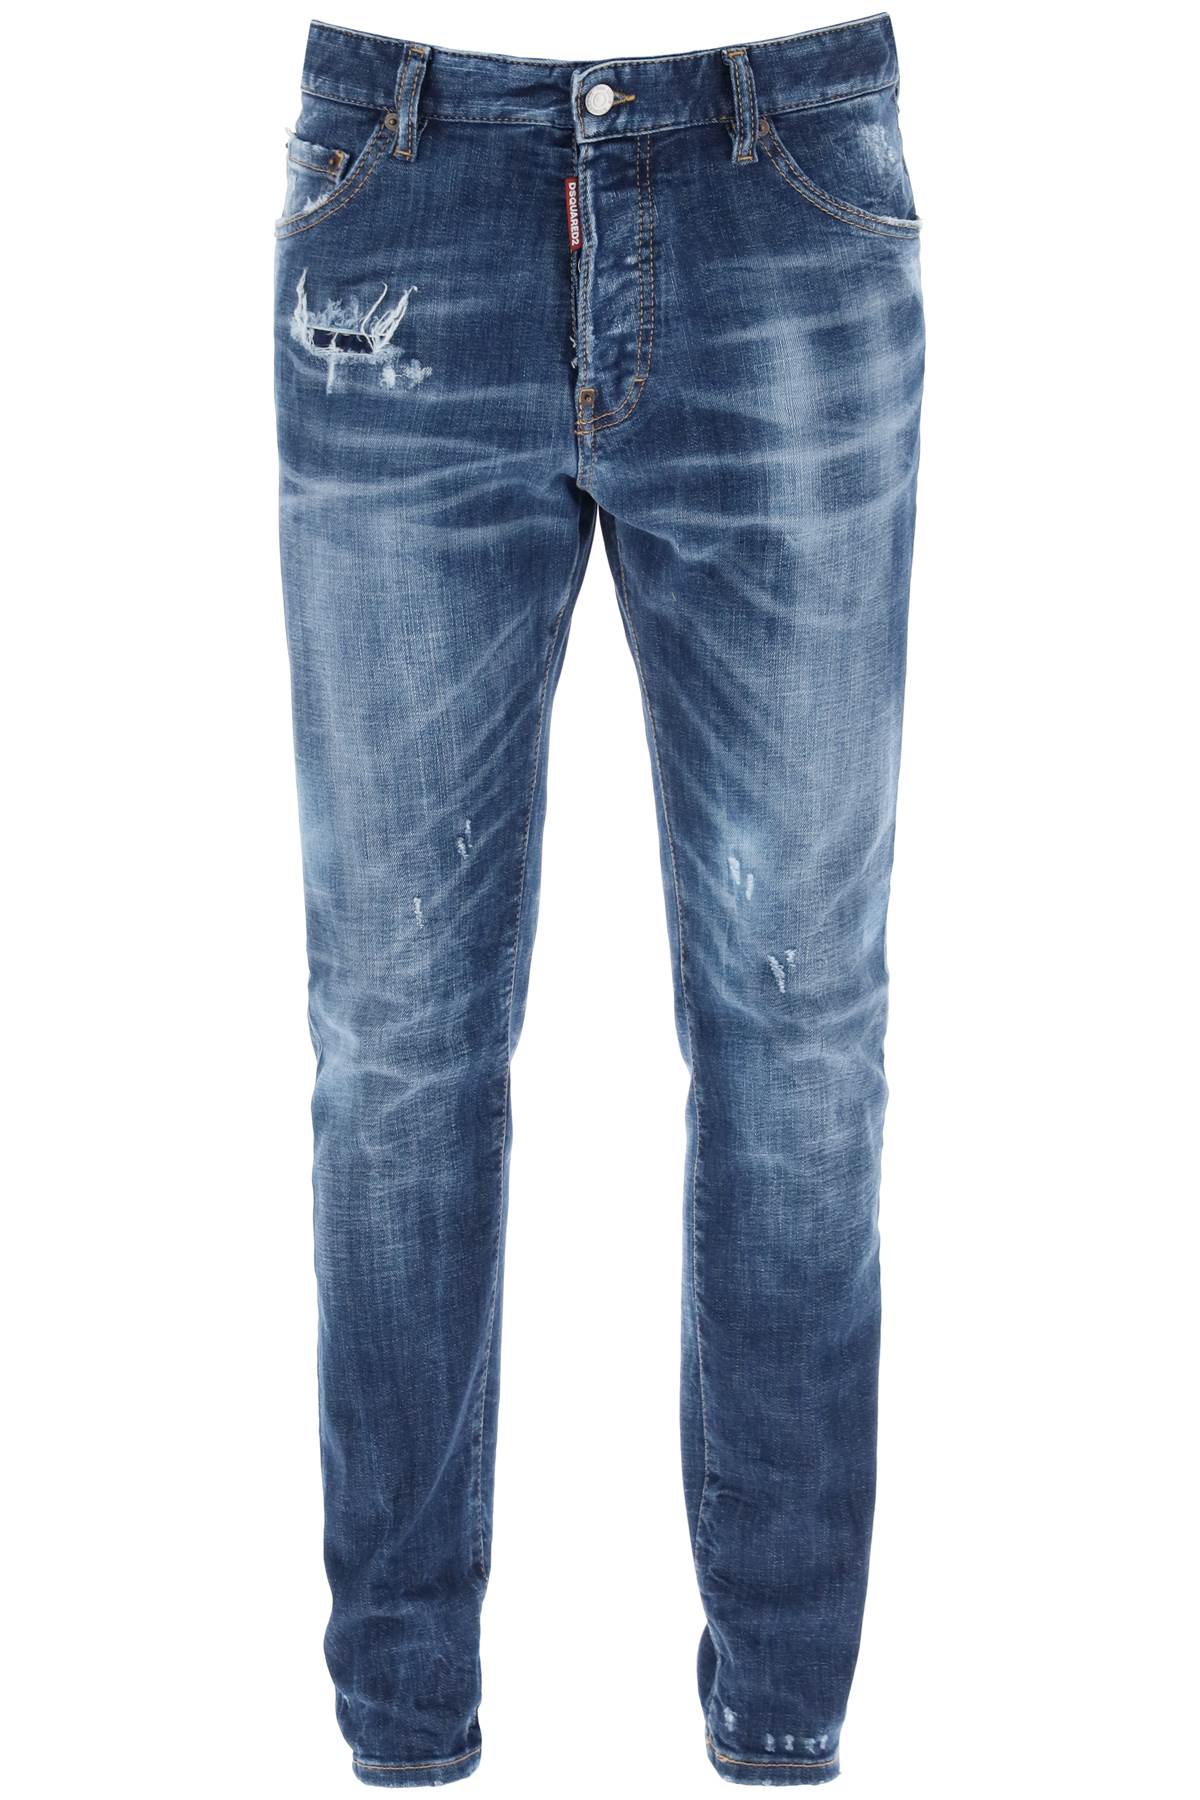 Dsquared2 jeans cool guy in dark 70's wash-0